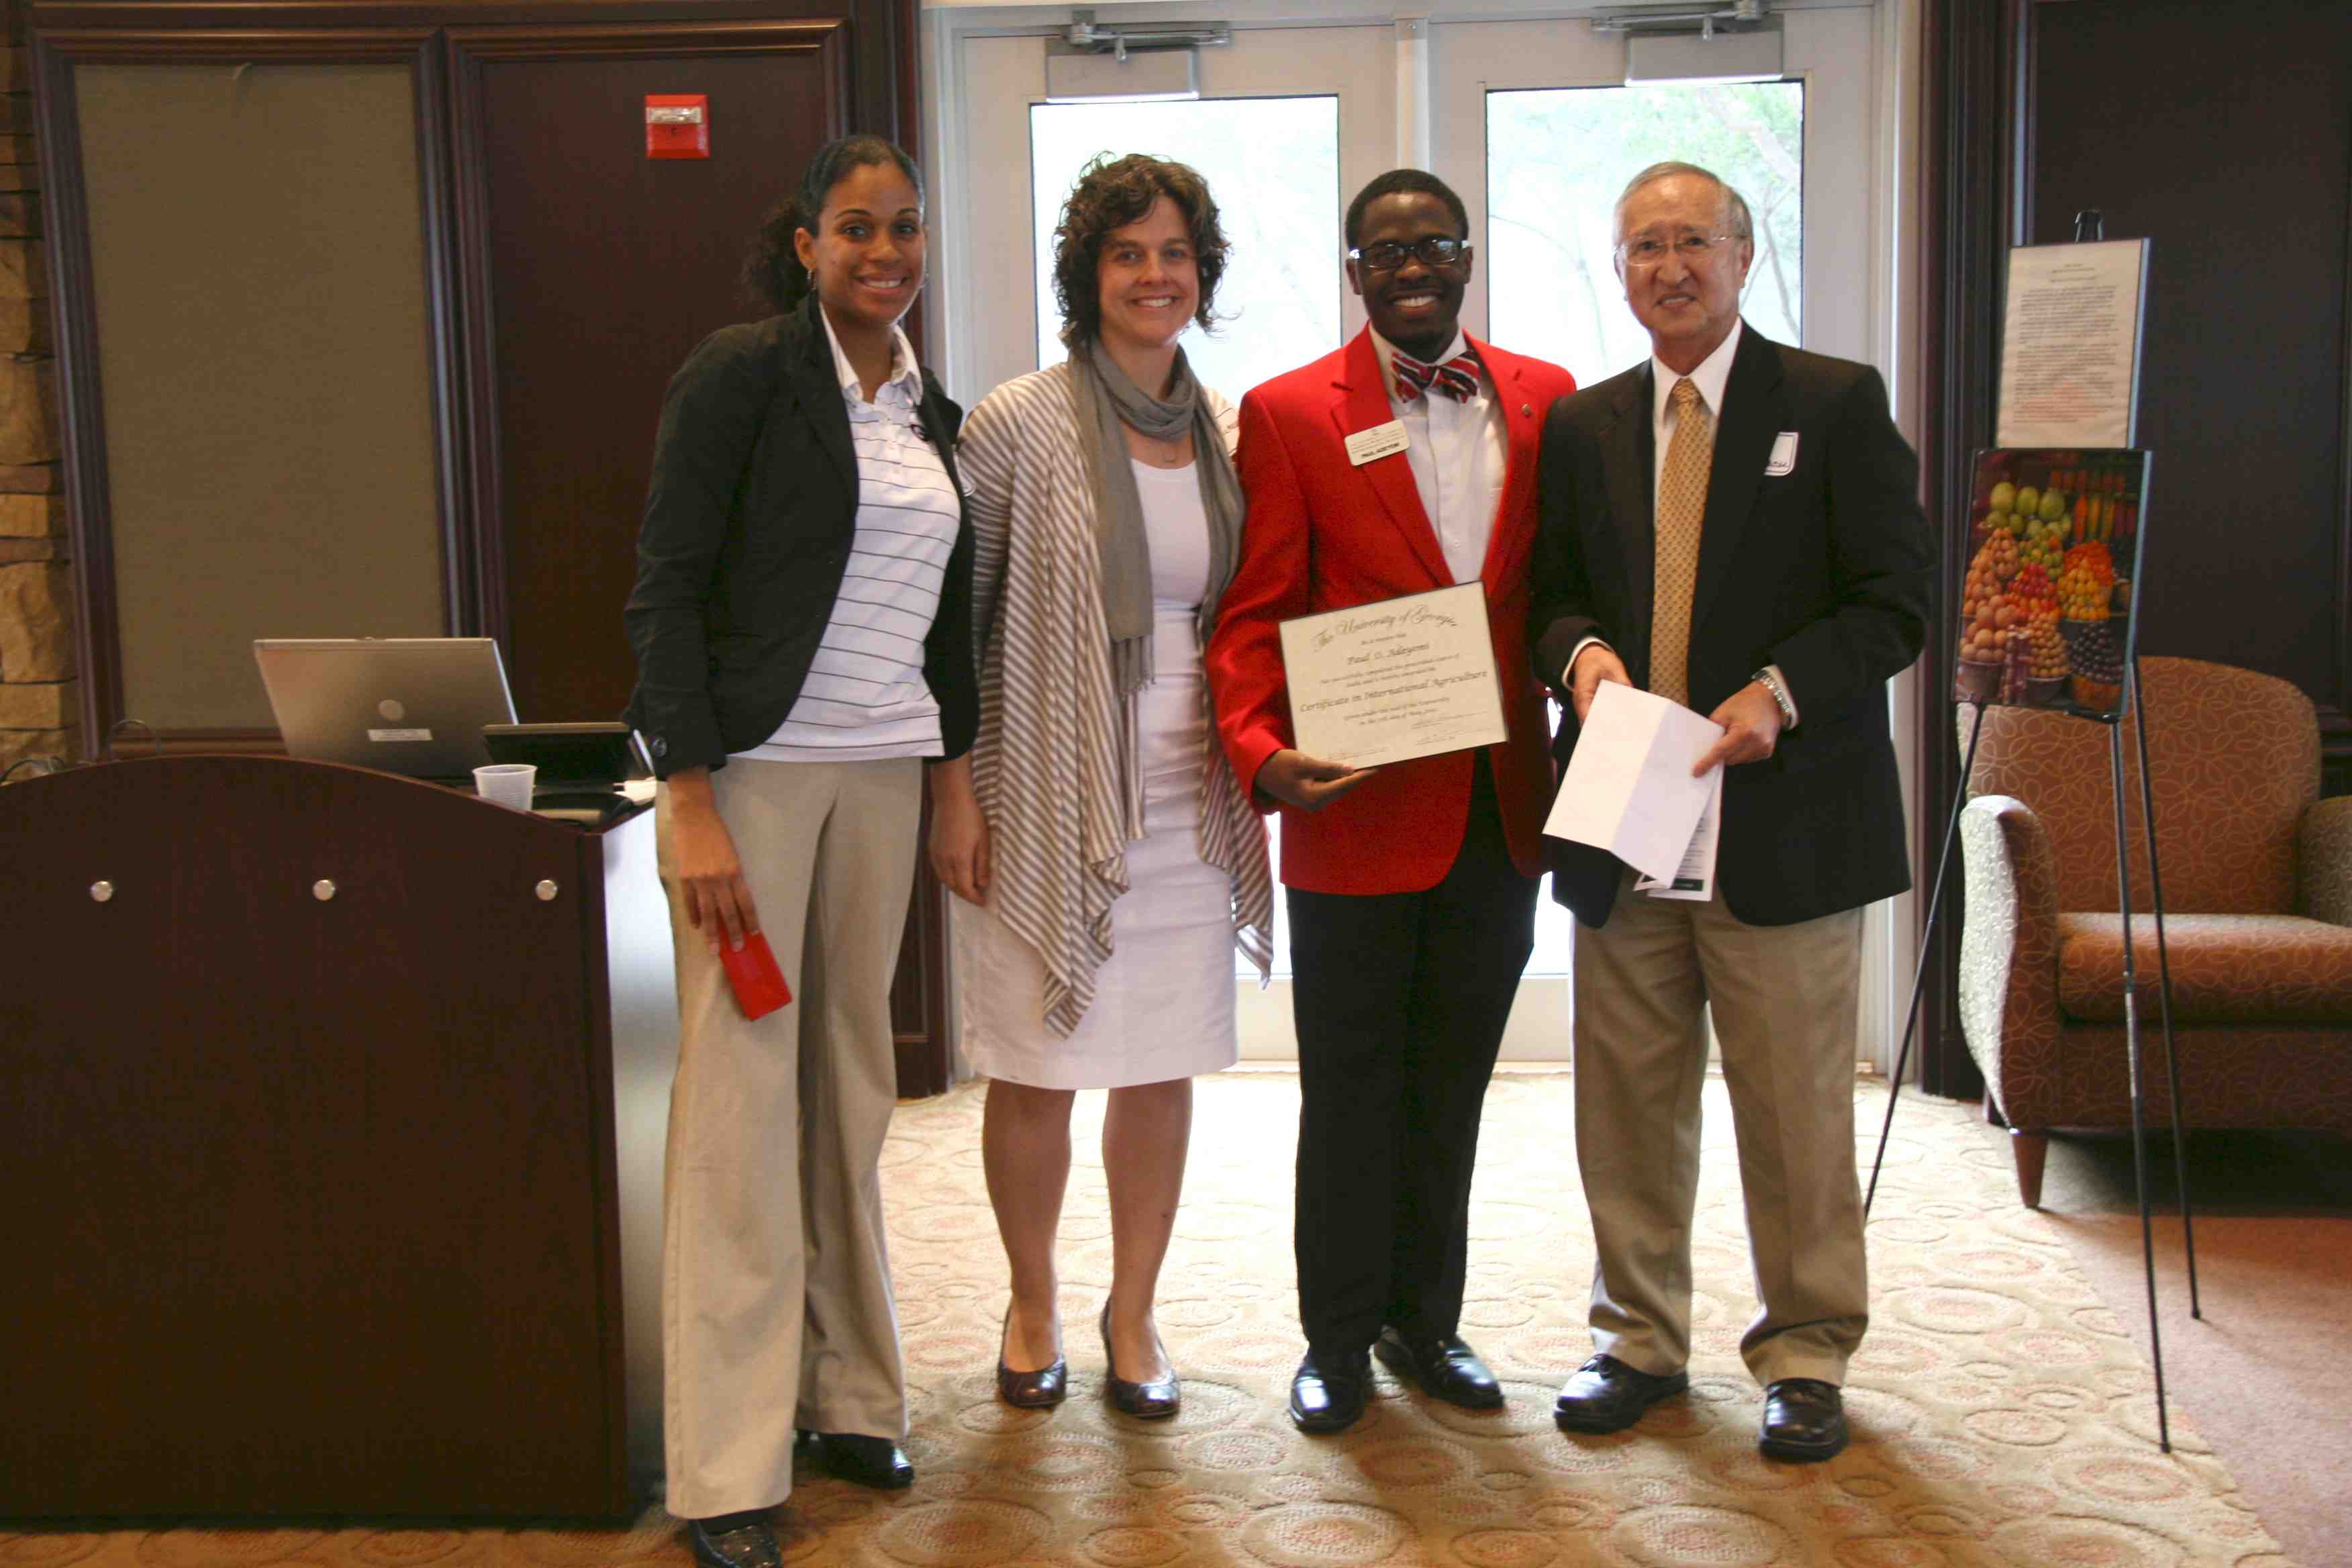 Paul Adeyemi receives his certificate of International Agriculture. He was the beneficiary of a $5,000 Arnold International Fellowship, which paid for a study abroad trip to spain last summer, to continue his studies in Latin American this summer and to take part in a service-learning trip this summer.